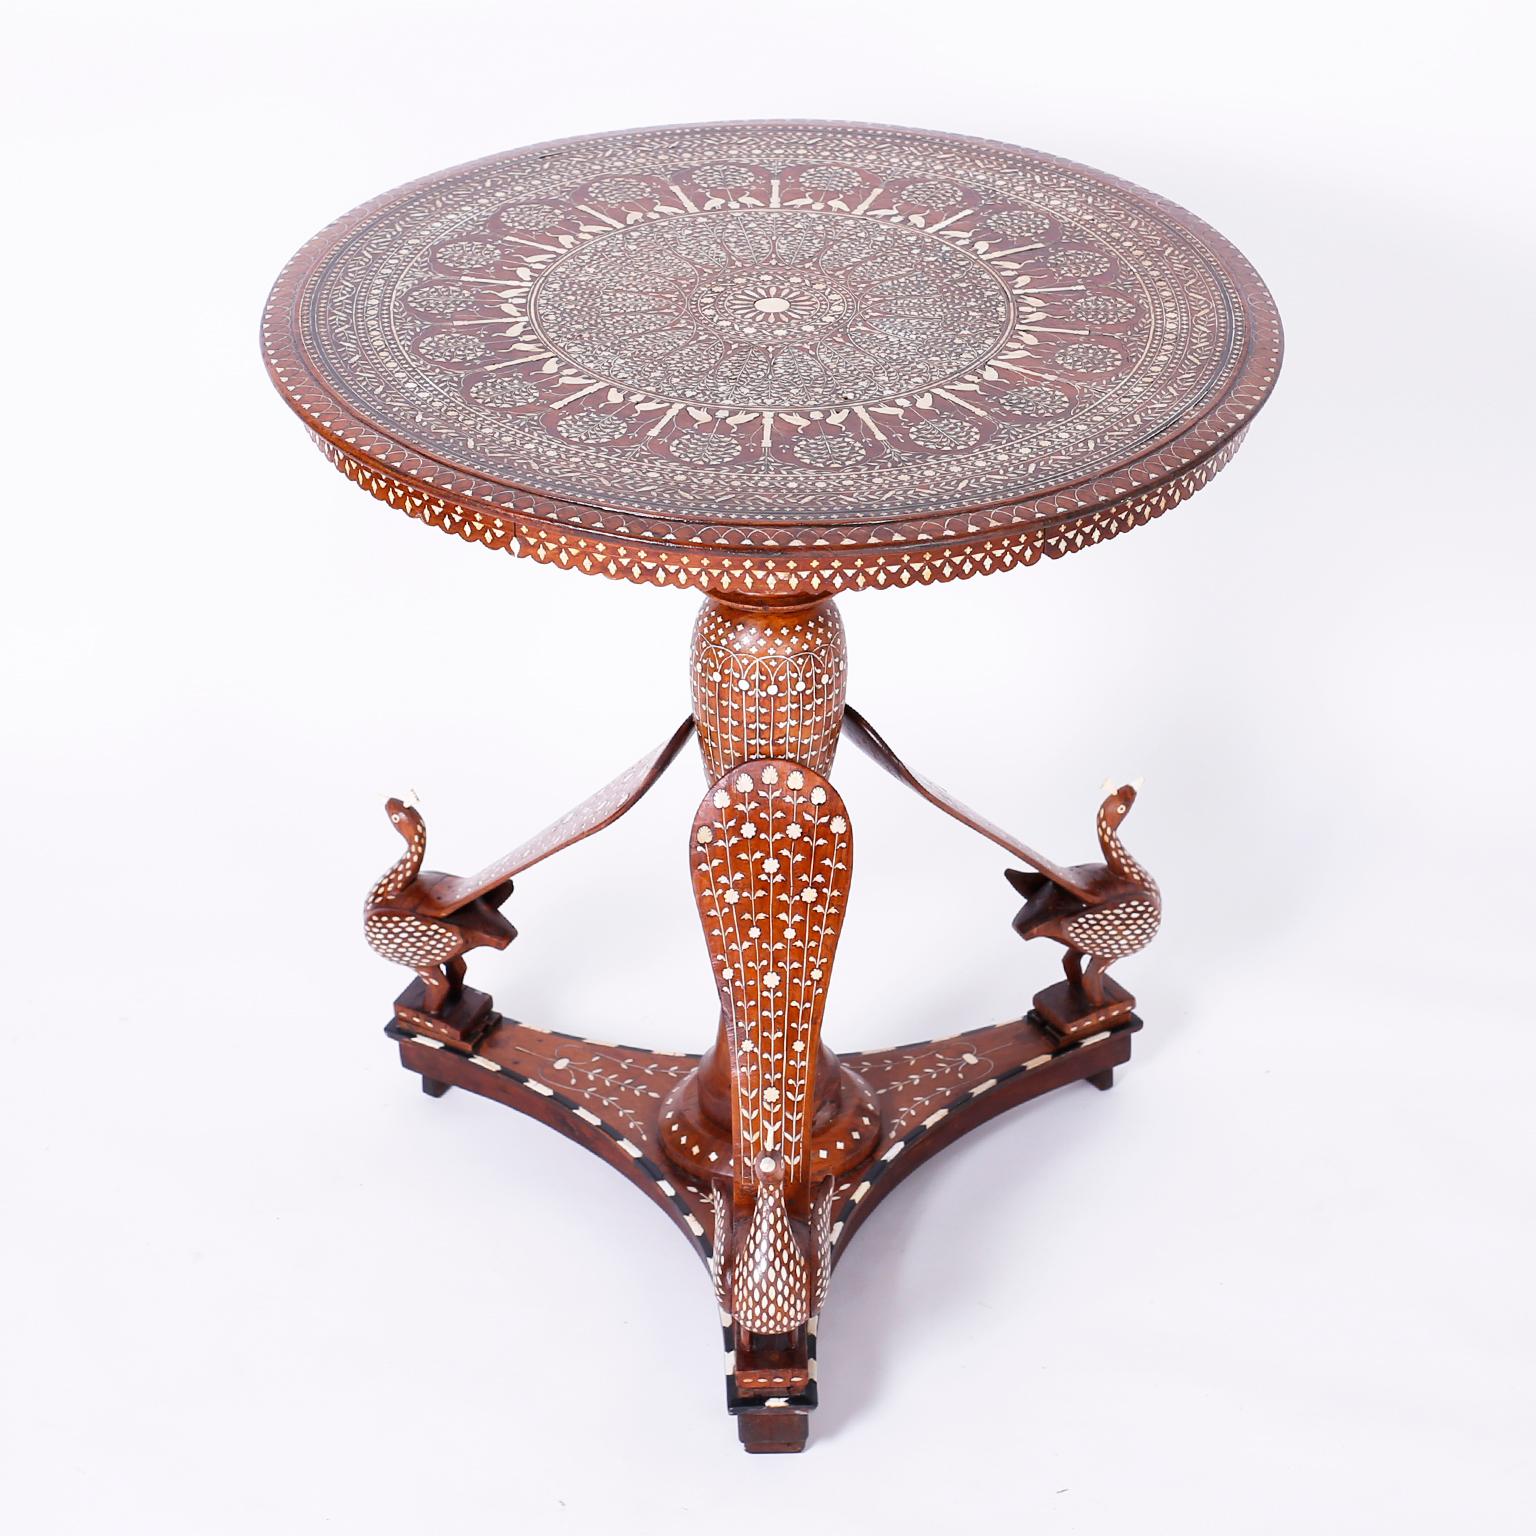 Antique Anglo-Indian table crafted in mahogany ambitiously inlaid with a symbolic floral center medallion surrounded by trees and birds bordered by layers of floral designs.